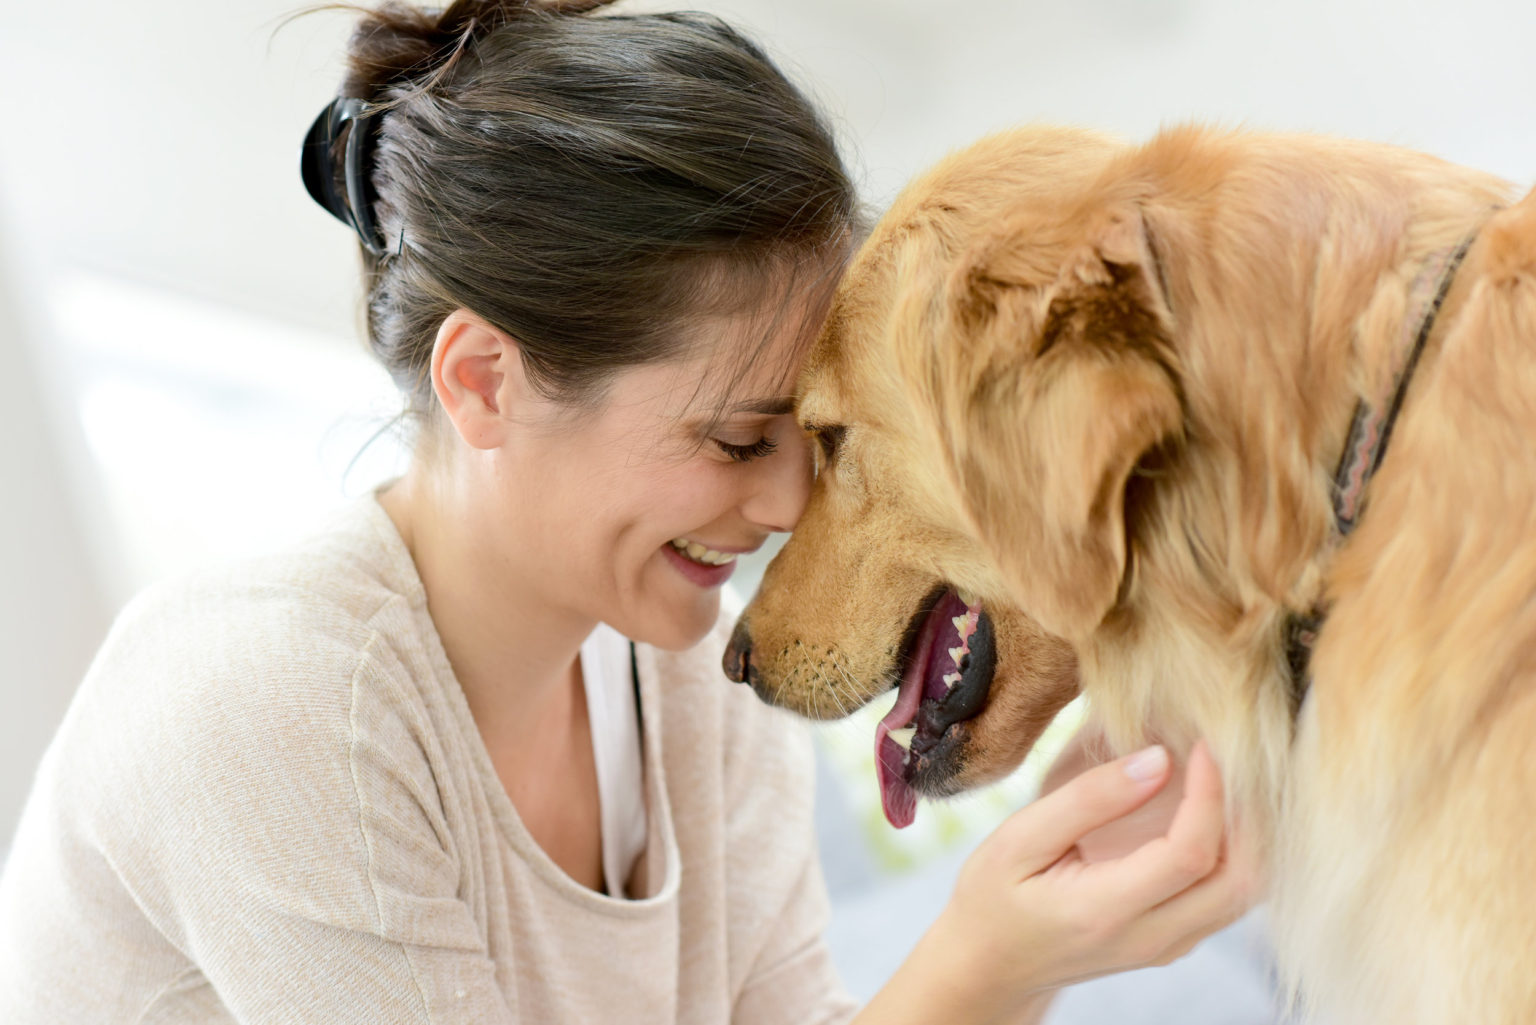 10 Dogs Languages Explained: How to Understand Your Dog Better